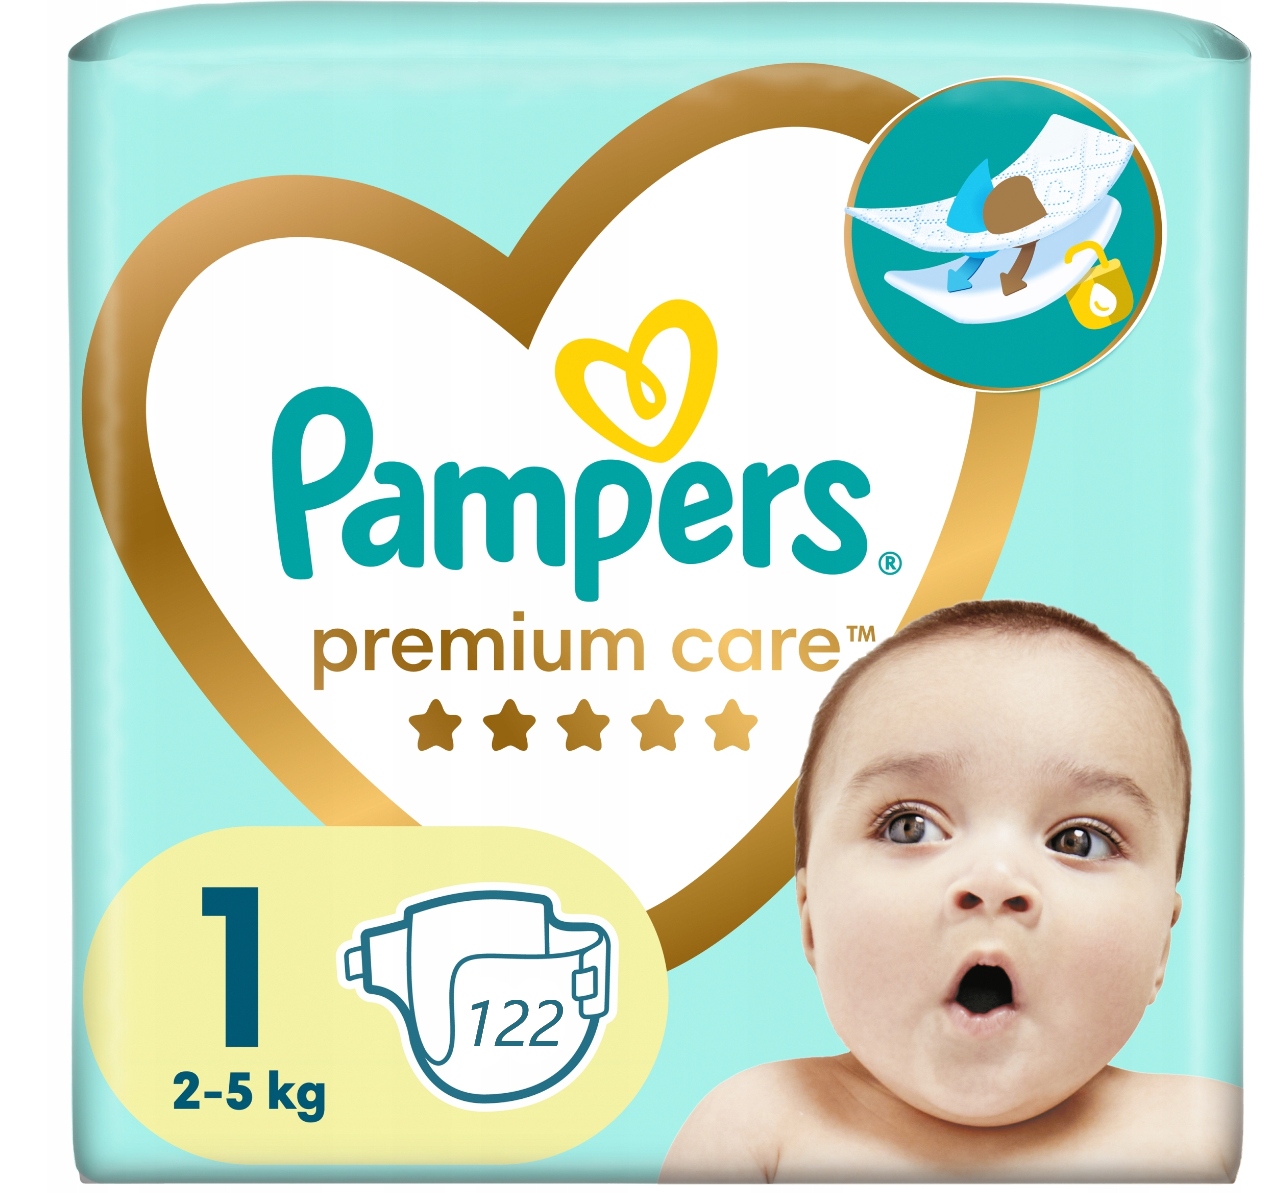 poeluchy pampers giant giga box